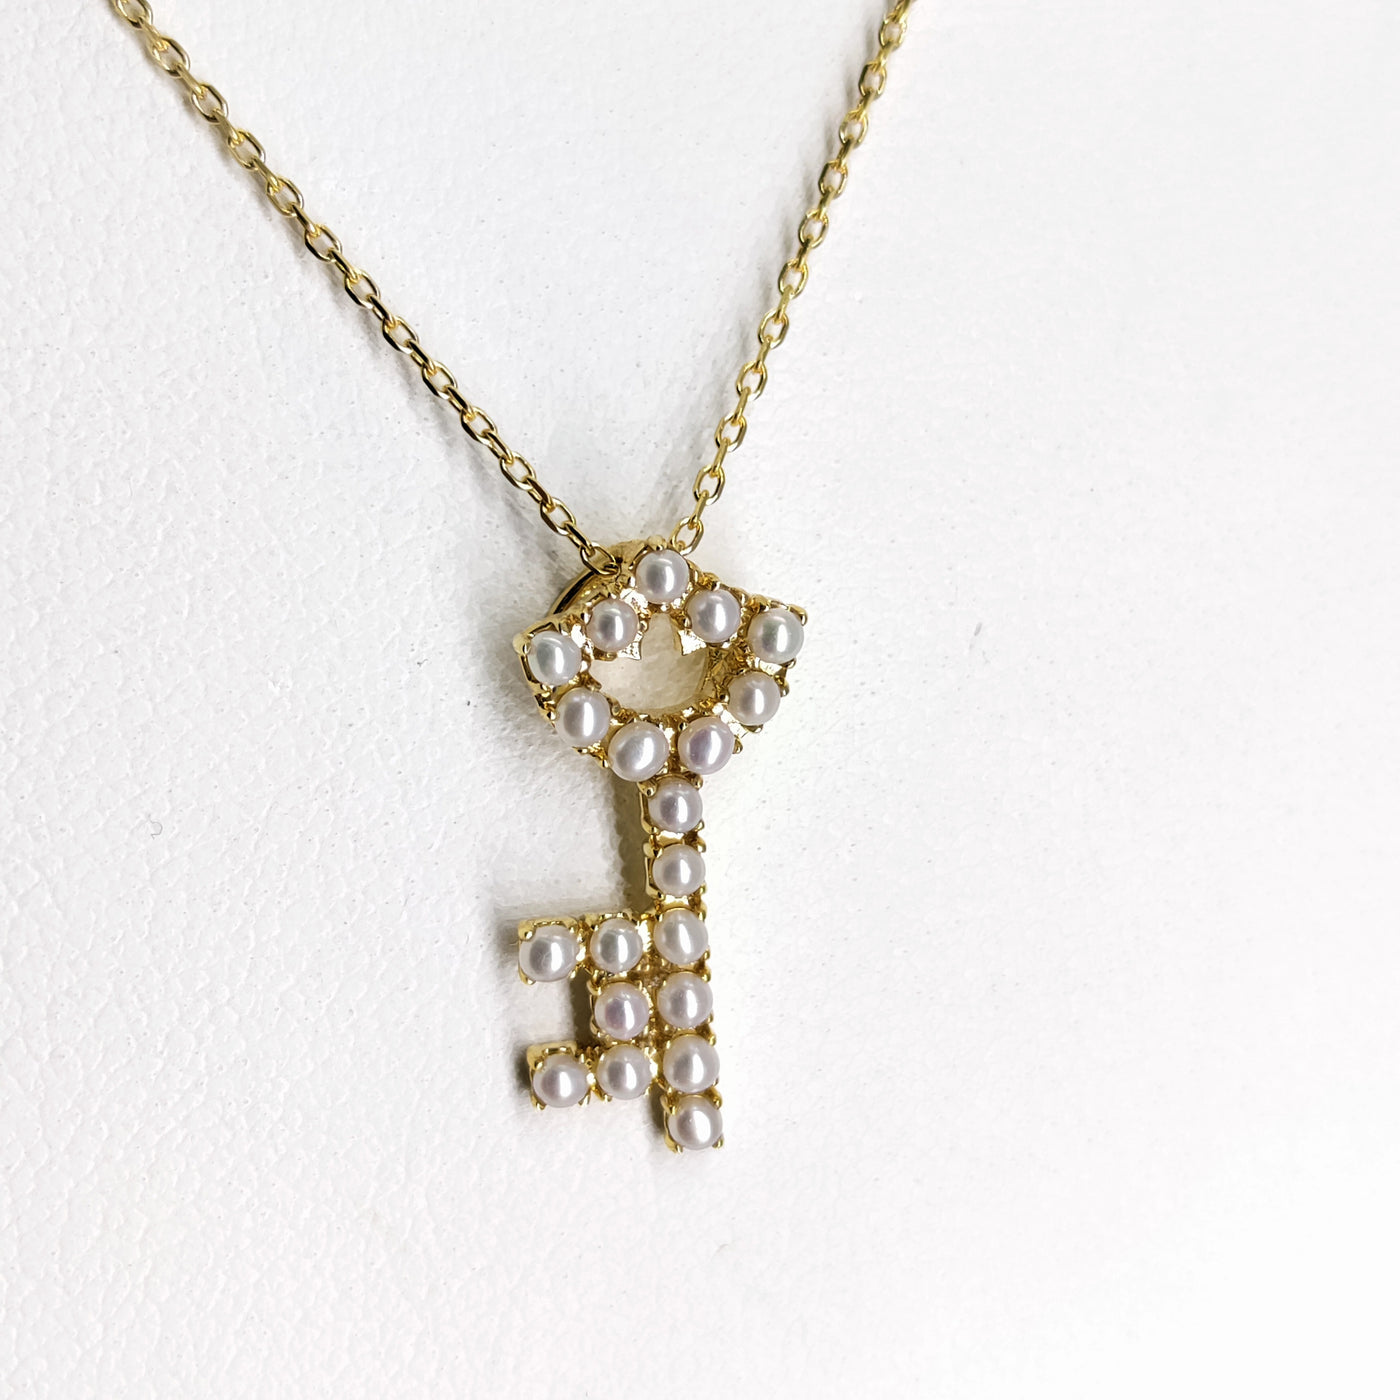 "Key to the Deep" 16"-18" Necklace - Gold, Pearl